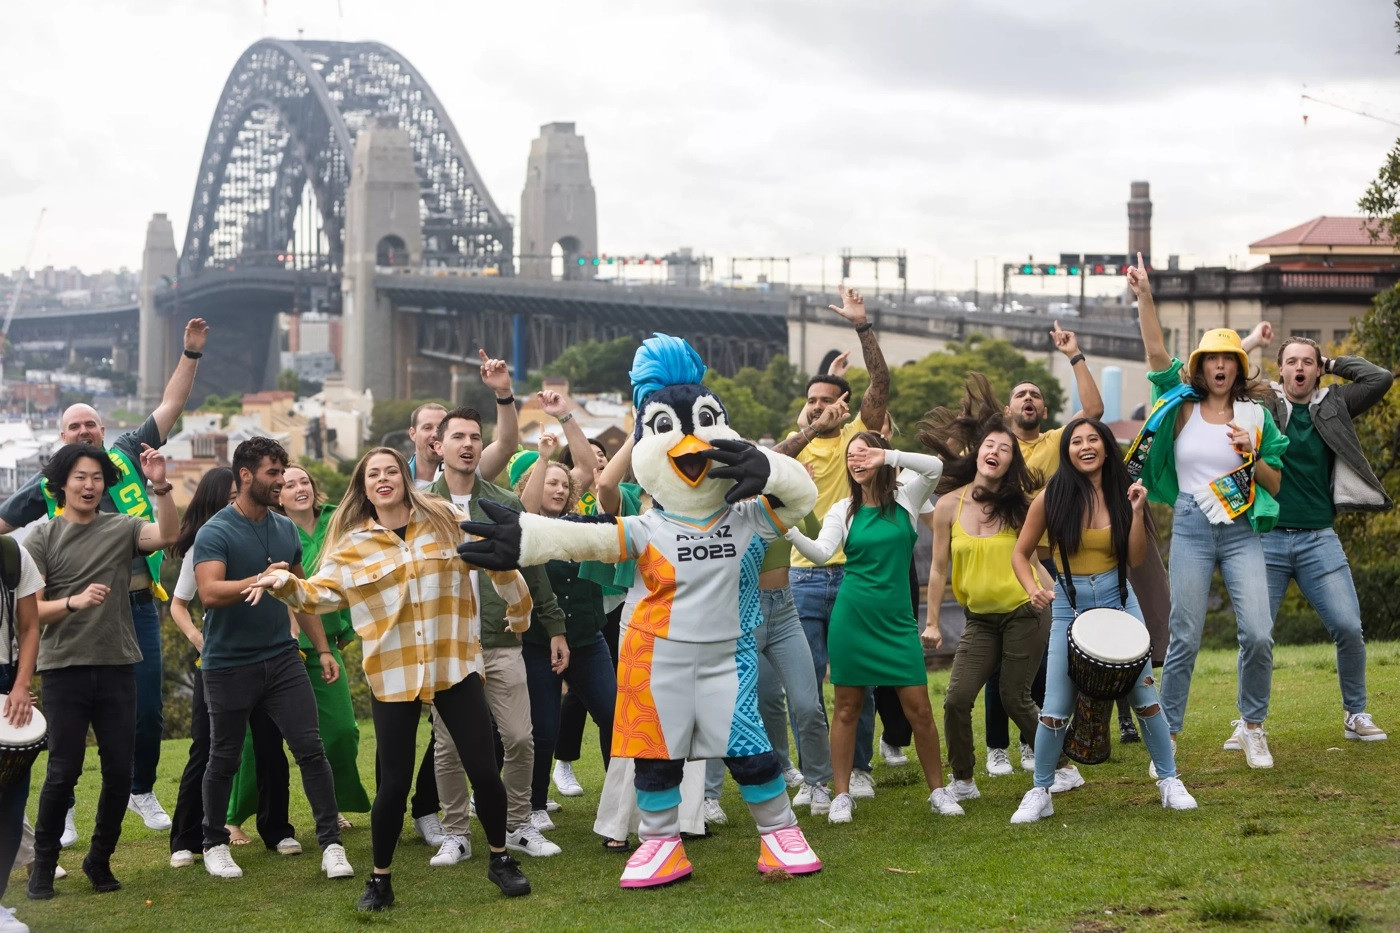 A series of activities are set to take place on Sydney Harbour Bridge later this month ©FIFA